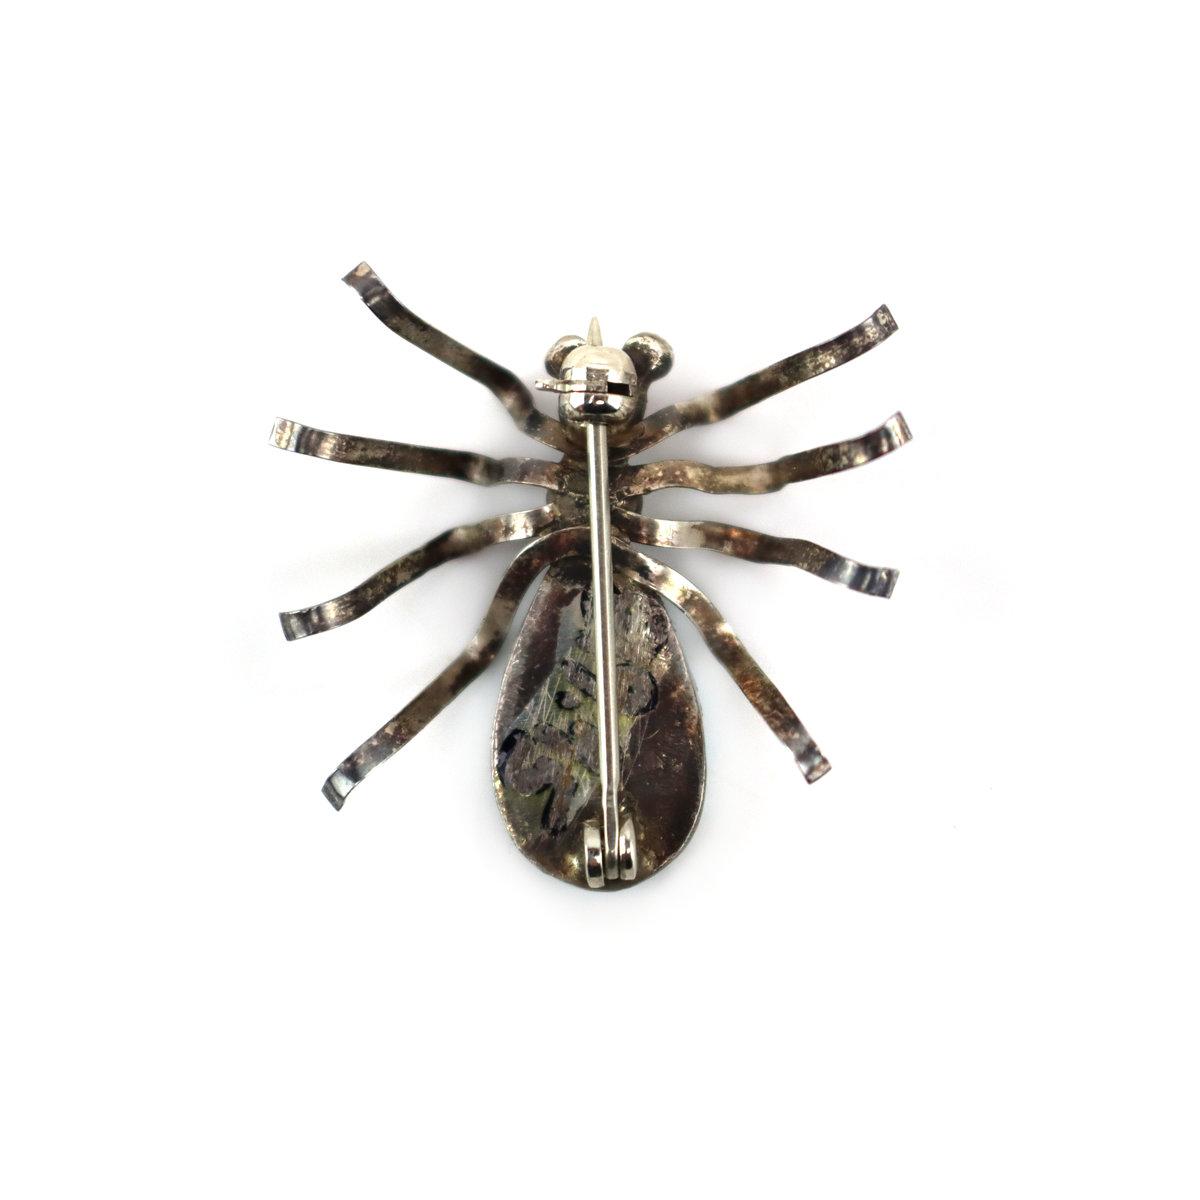 Navajo - Turquoise and Silver Spider Pin c. 1960s, 1.125" x 1.125" (J16103)